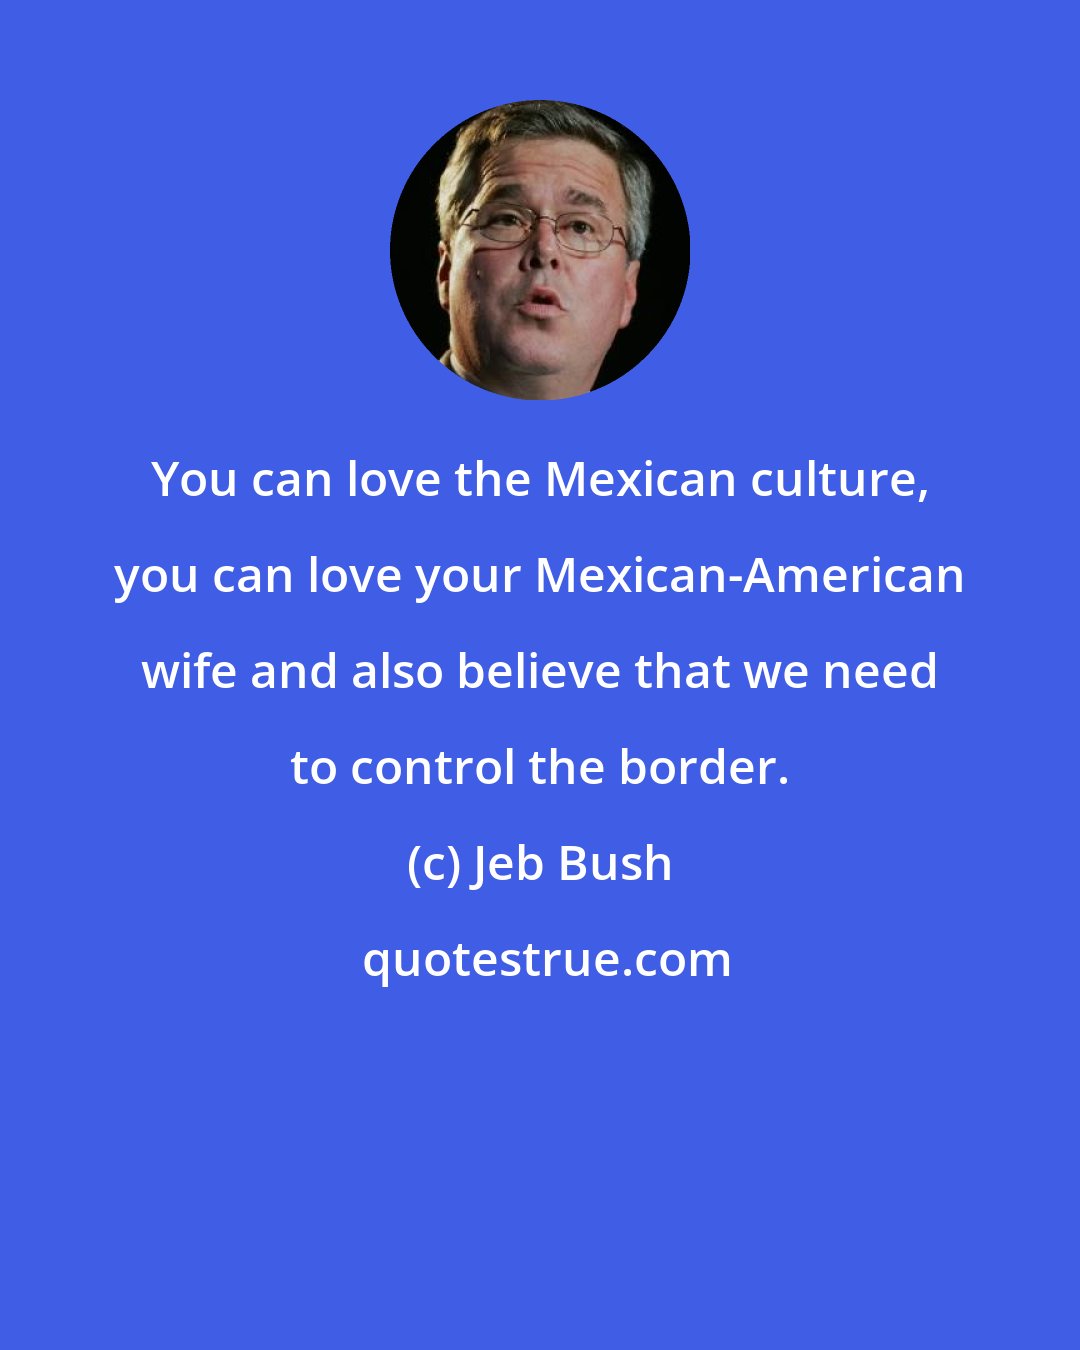 Jeb Bush: You can love the Mexican culture, you can love your Mexican-American wife and also believe that we need to control the border.